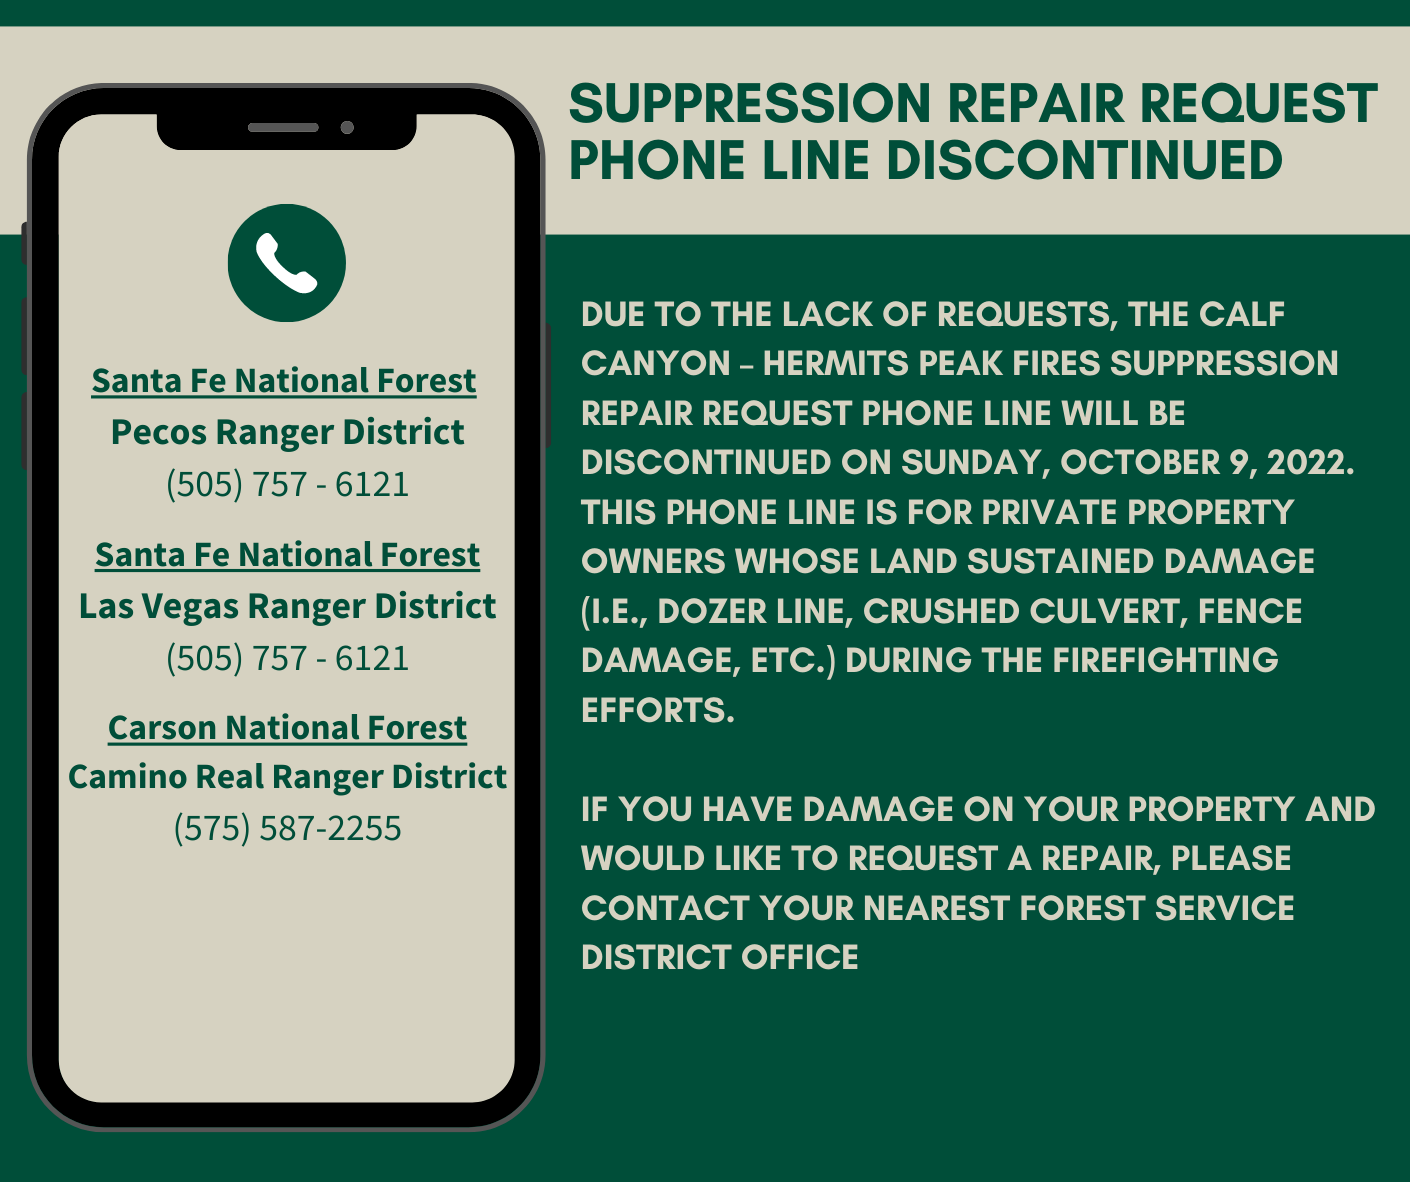 Due to the lack of requests, the Calf Canyon – Hermits Peak Fires ‘Suppression Repair Request’ phone line will be discontinued on Sunday, October 9, 2022. This phone line is for private property owners whose land sustained damage (i.e., dozer line, crushe